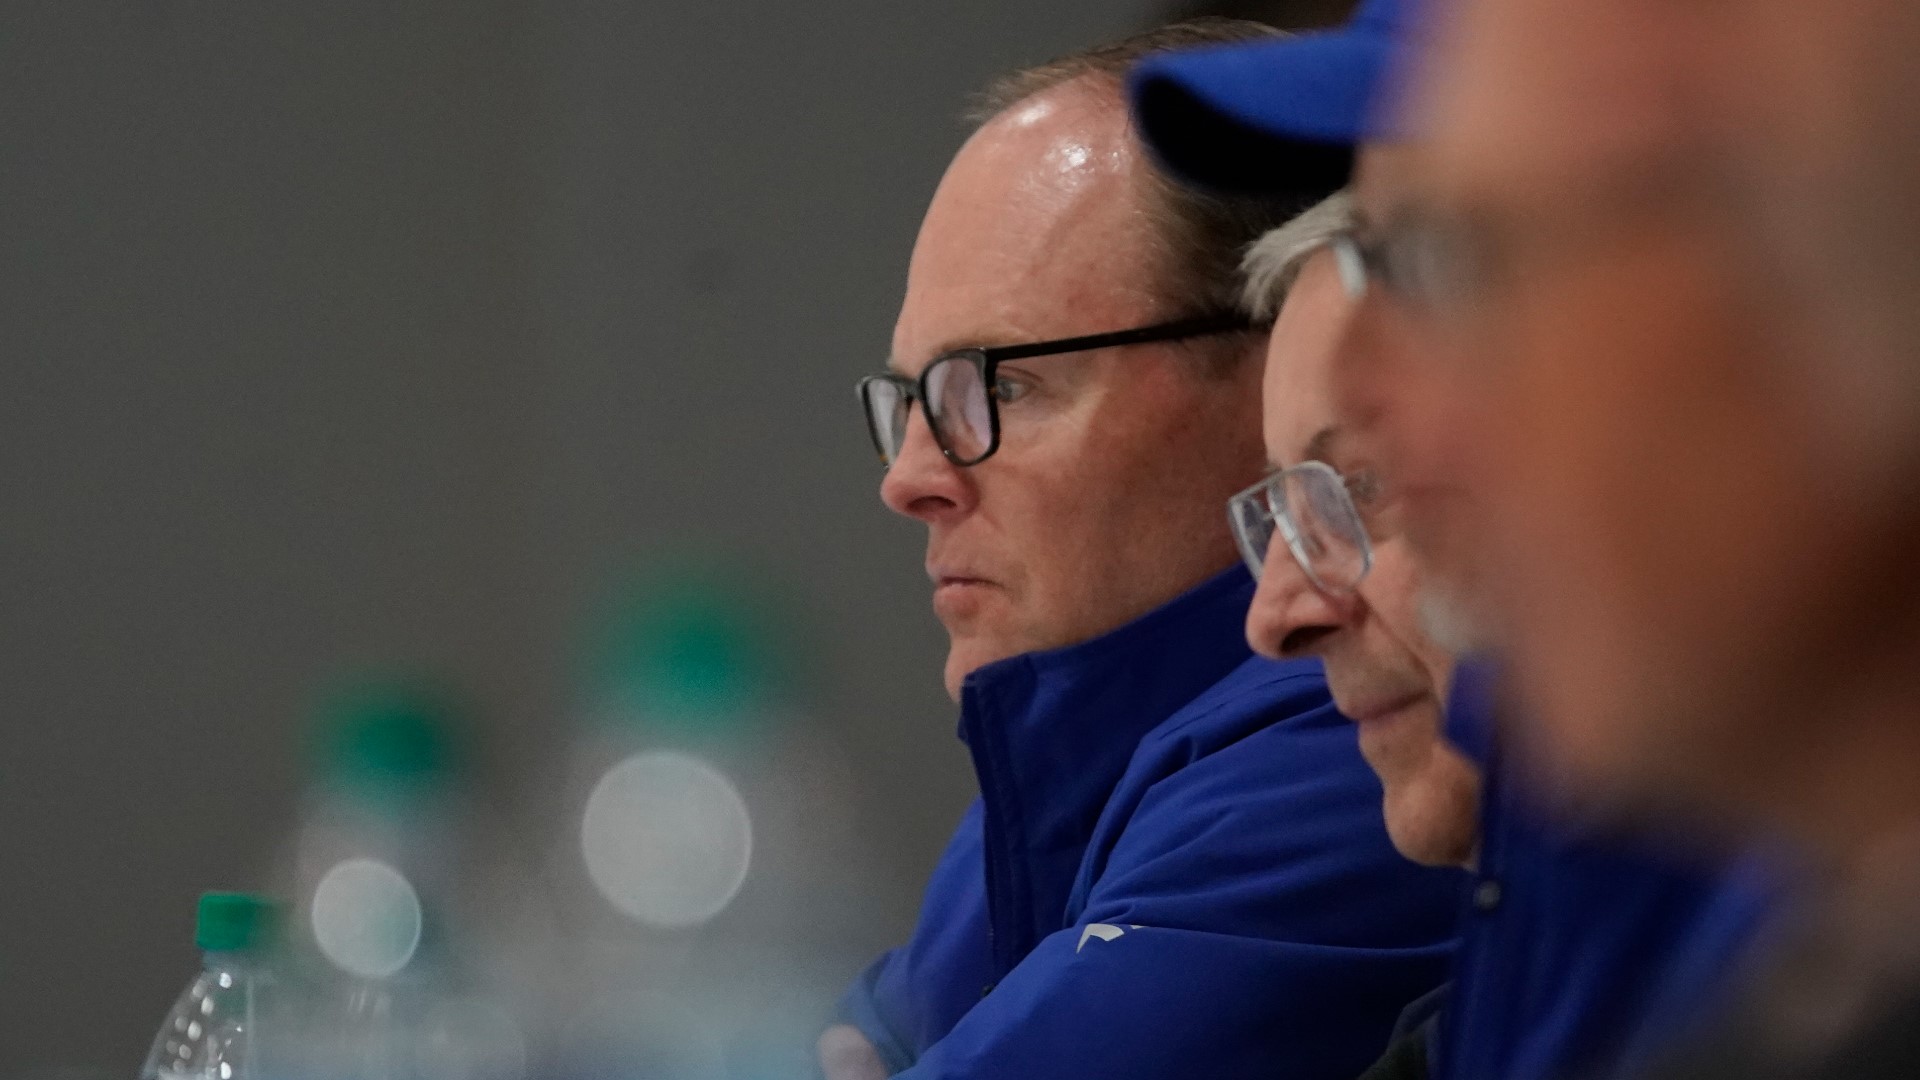 Take 2: Adam Benigni and Paul Hamilton discuss Sabres general manager Kevyn Adams' tenure so far, on a day when the team announced his contract extension.